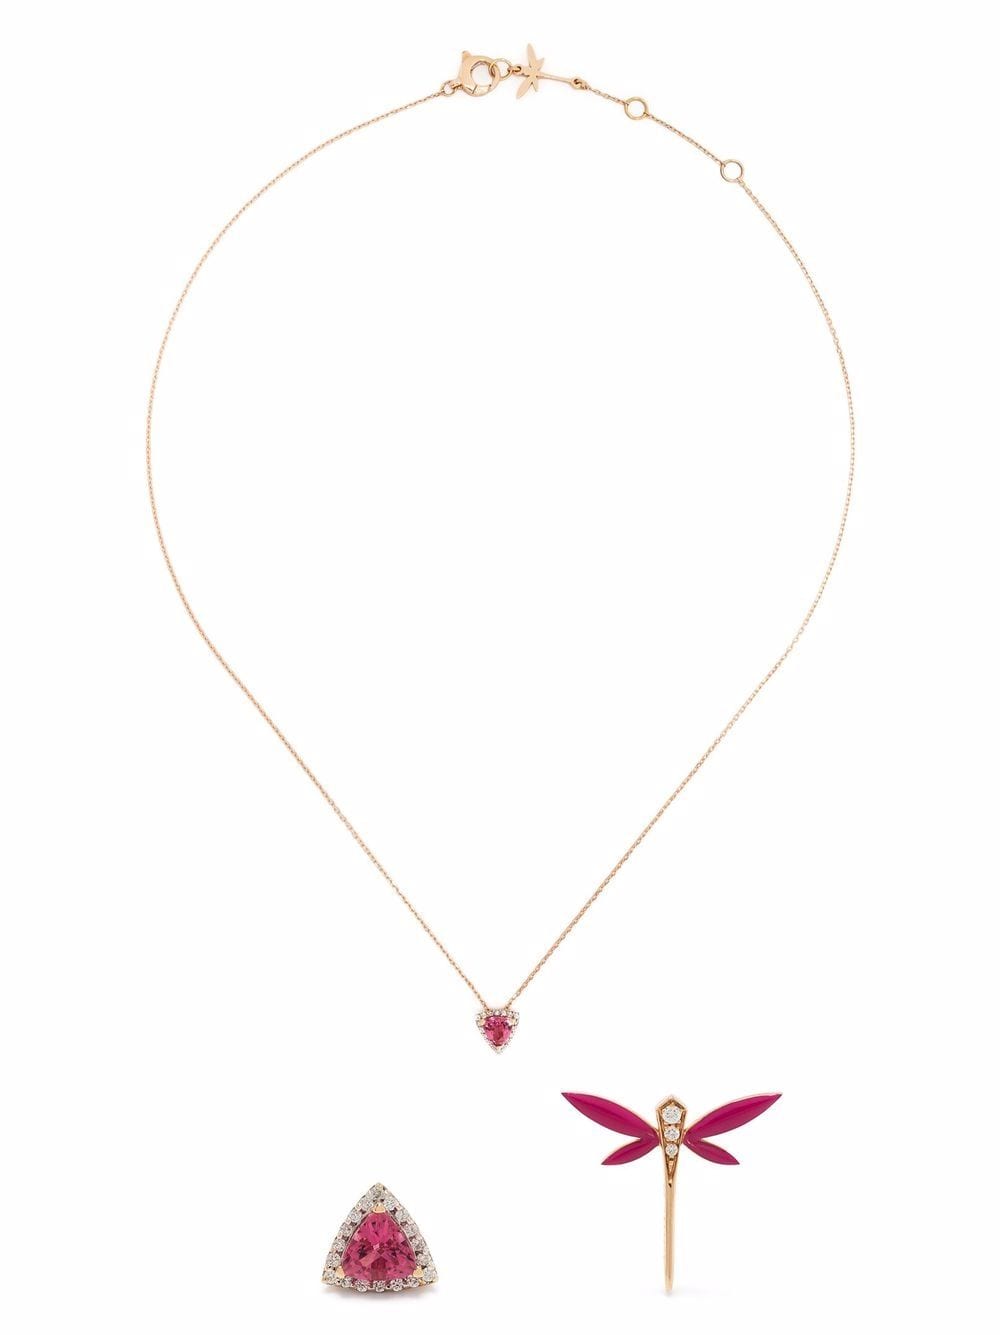 Anapsara 18kt rose gold Dragonfly earrings and necklace set